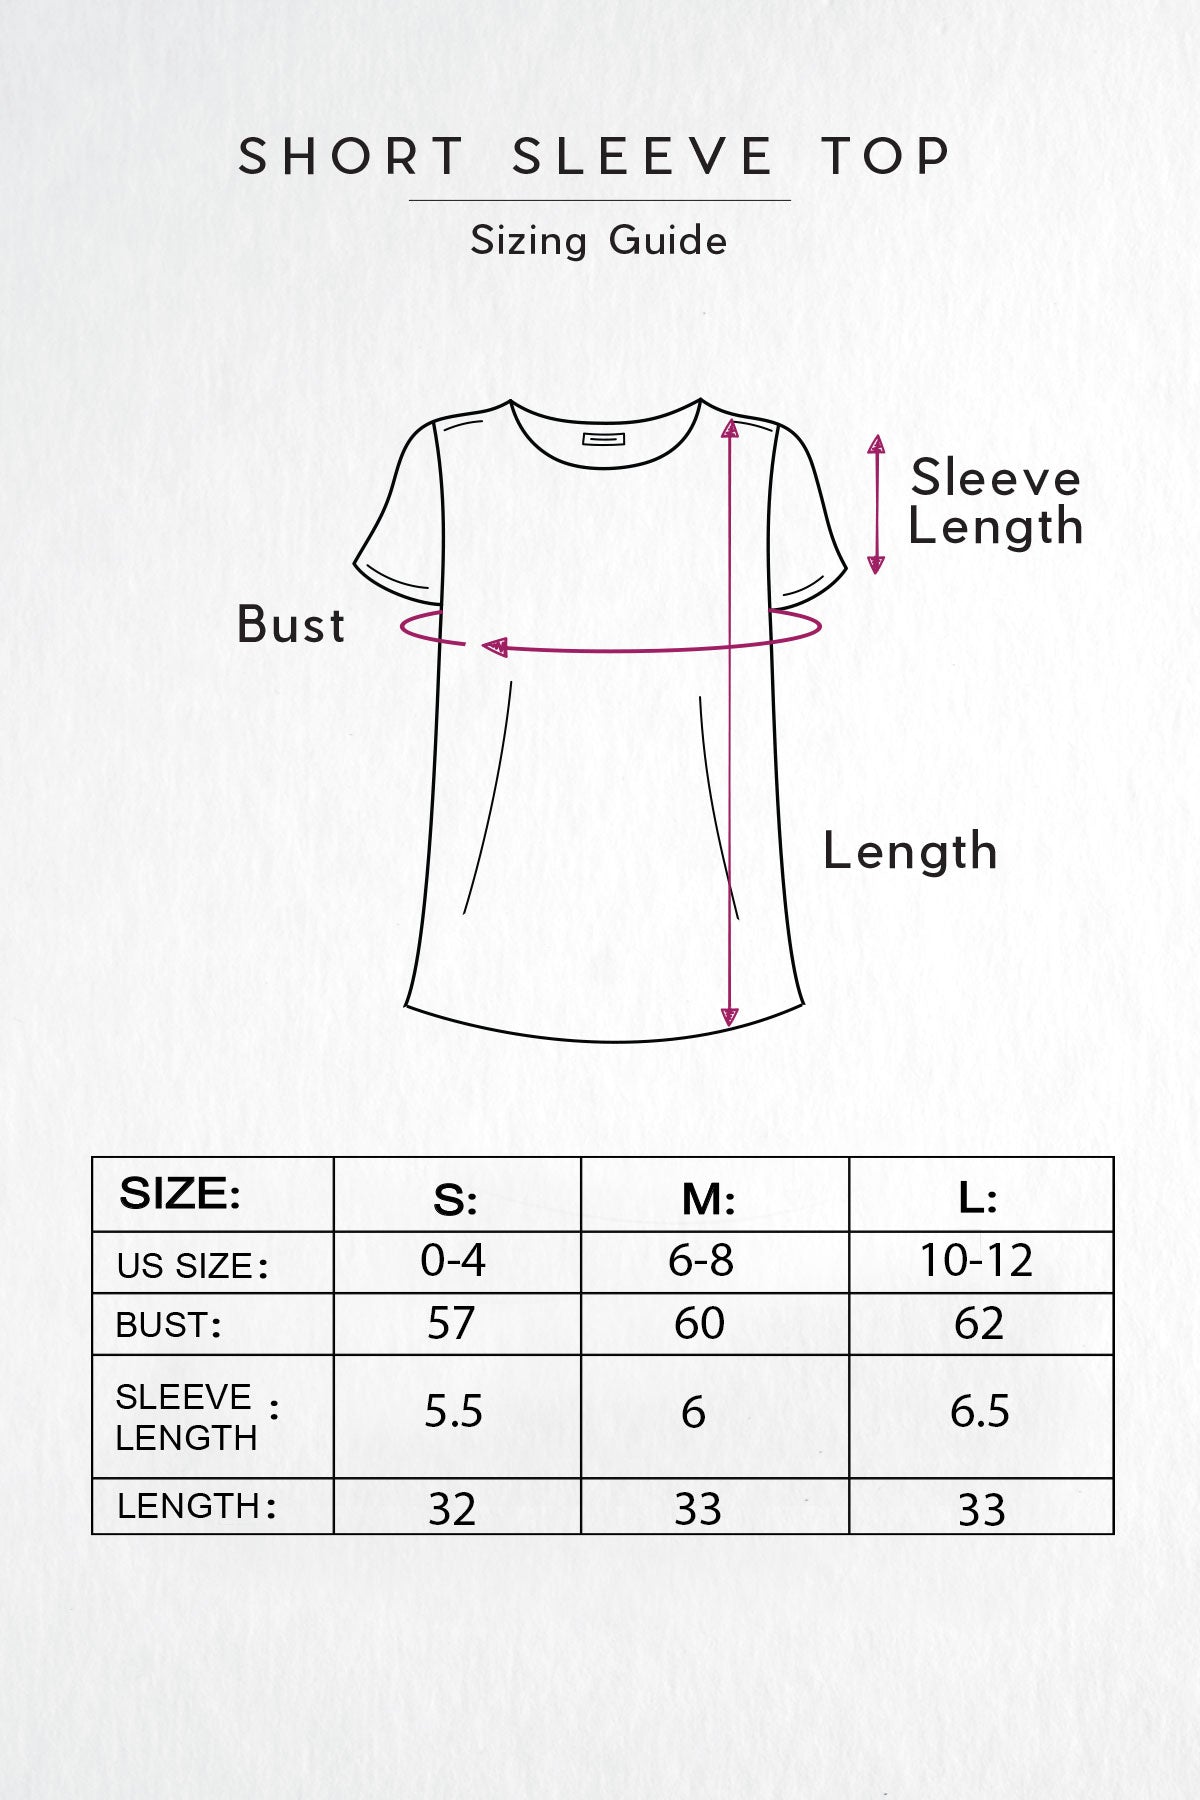 Short Sleeve Top Sizing Guide